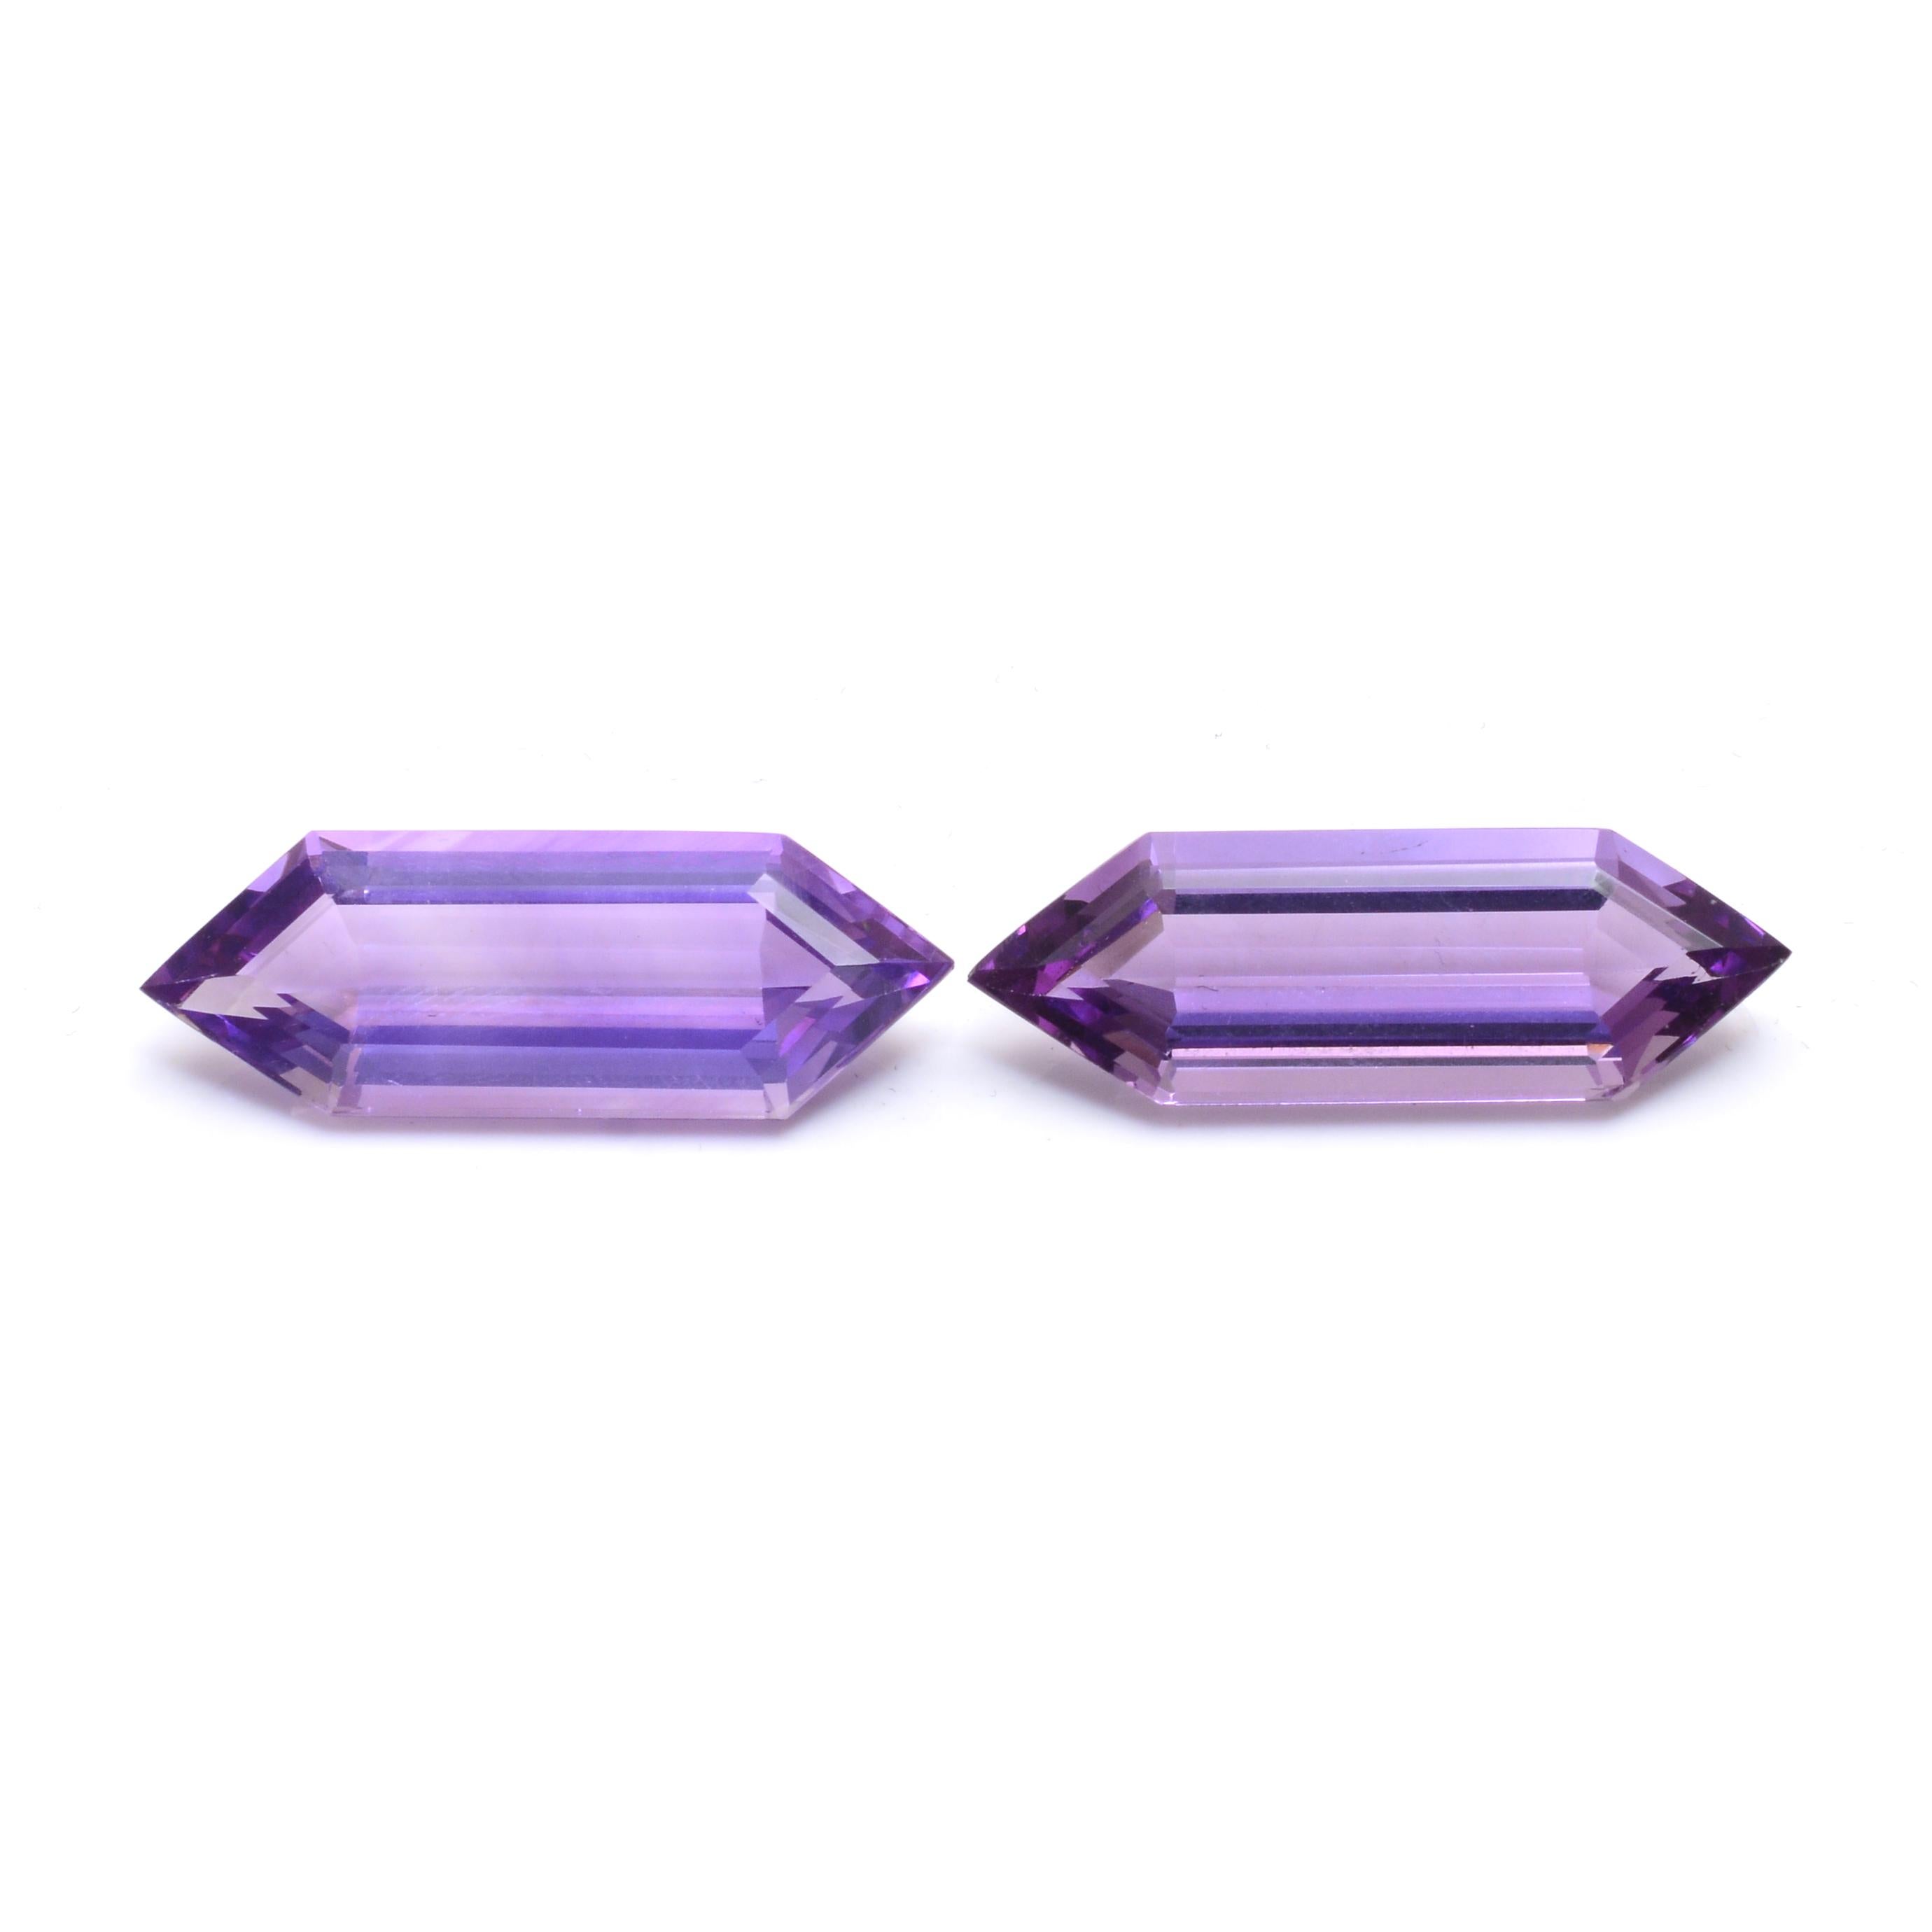 35.75 Carat Natural Fancy-Cut Pair of Amethysts:

A beautiful gem, this listing features a pair of natural fancy-cut amethysts weighing 35.75 carat. The amethysts possess an intense reddish violet colour, with superb clarity and brilliance. The